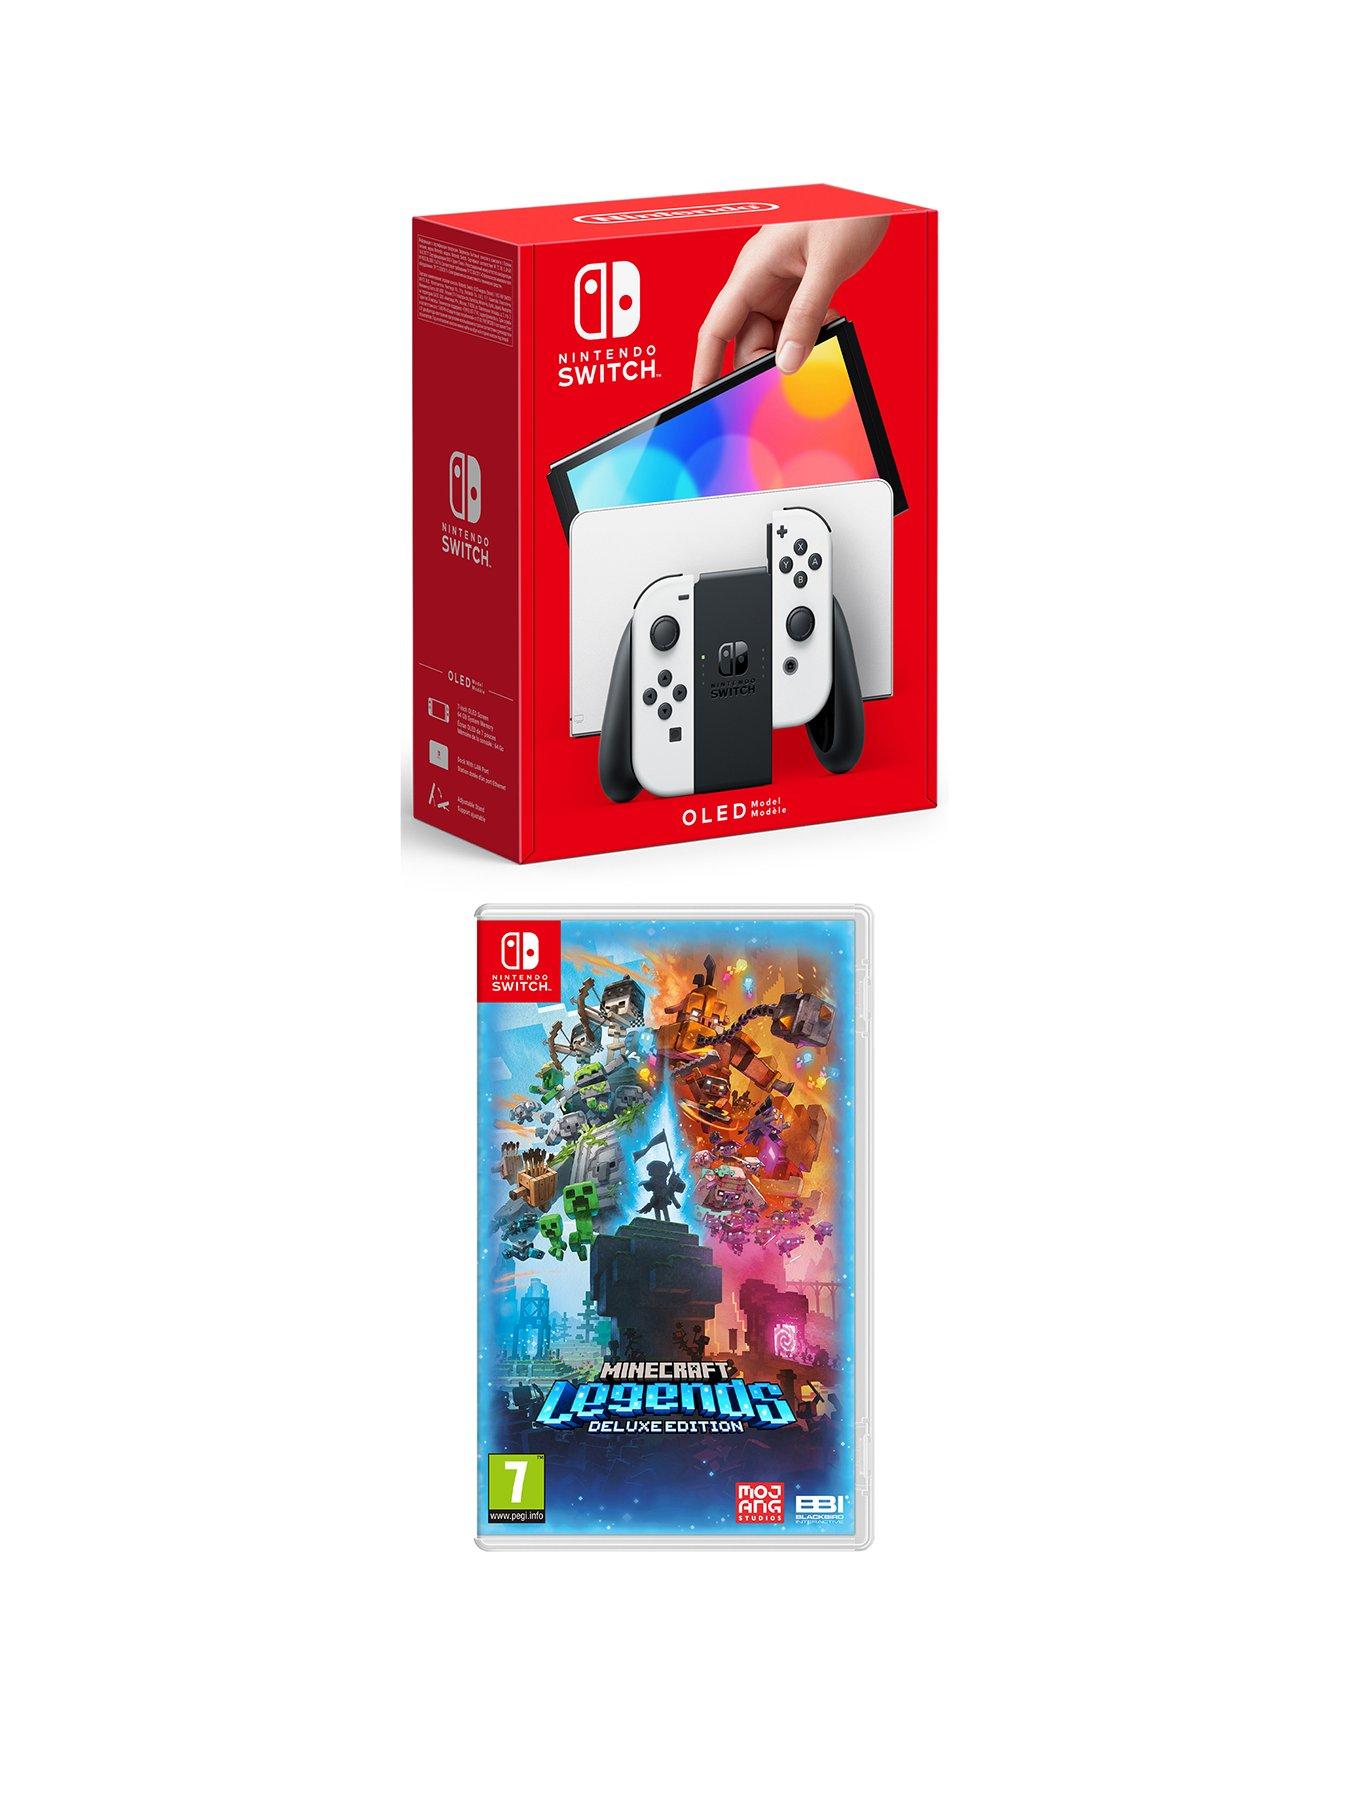 Nintendo Switch OLED Deluxe with Console Legends Minecraft Edition OLED White